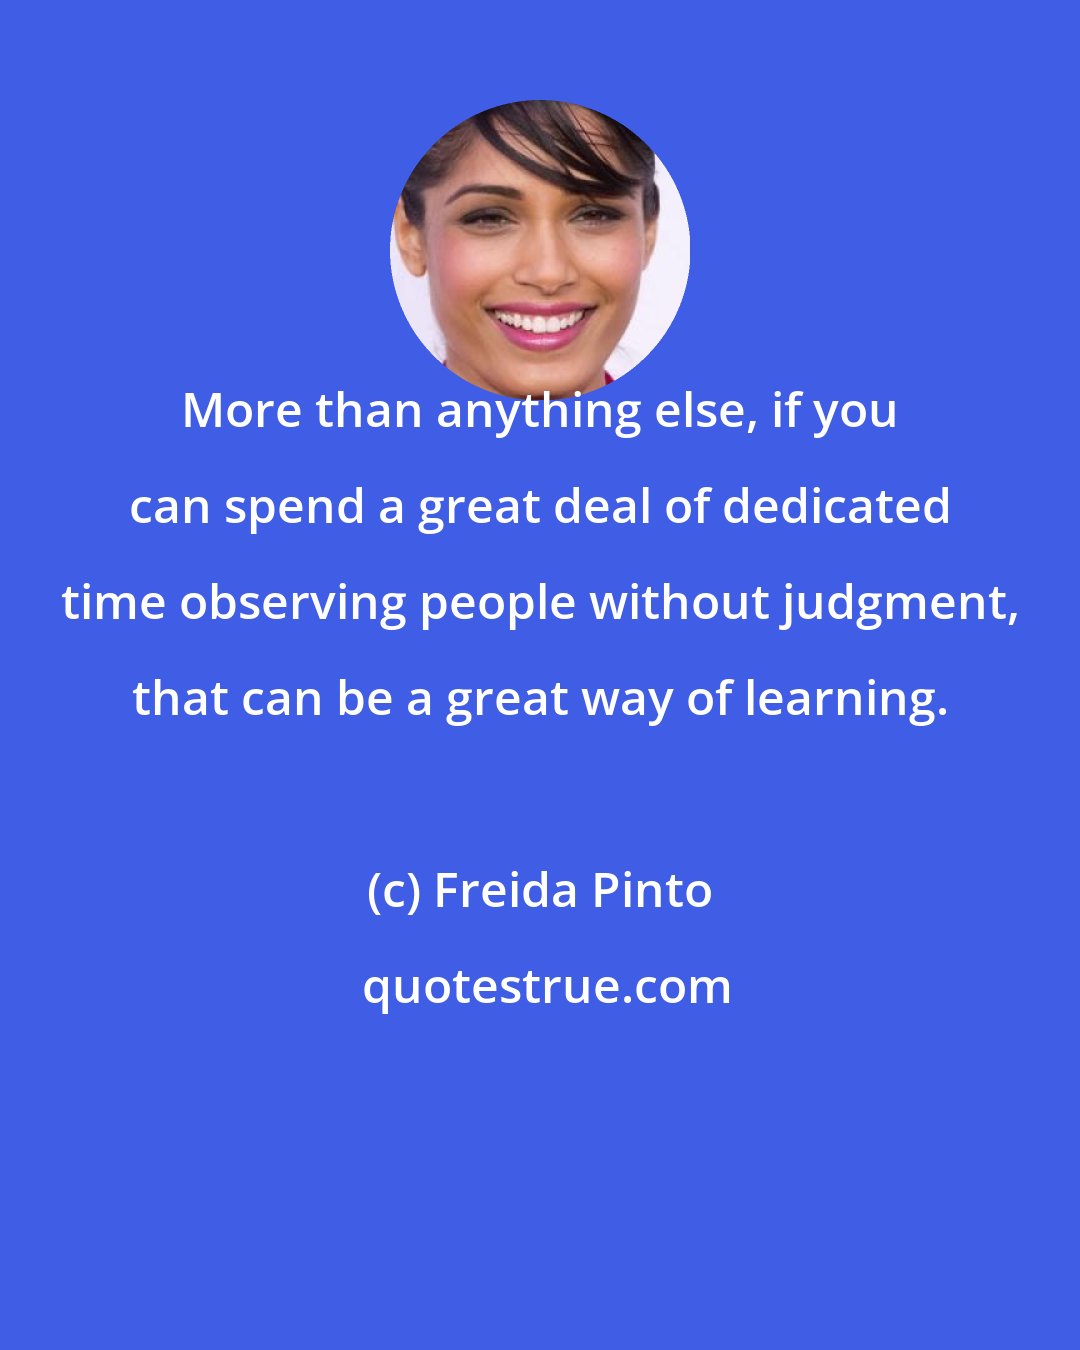 Freida Pinto: More than anything else, if you can spend a great deal of dedicated time observing people without judgment, that can be a great way of learning.